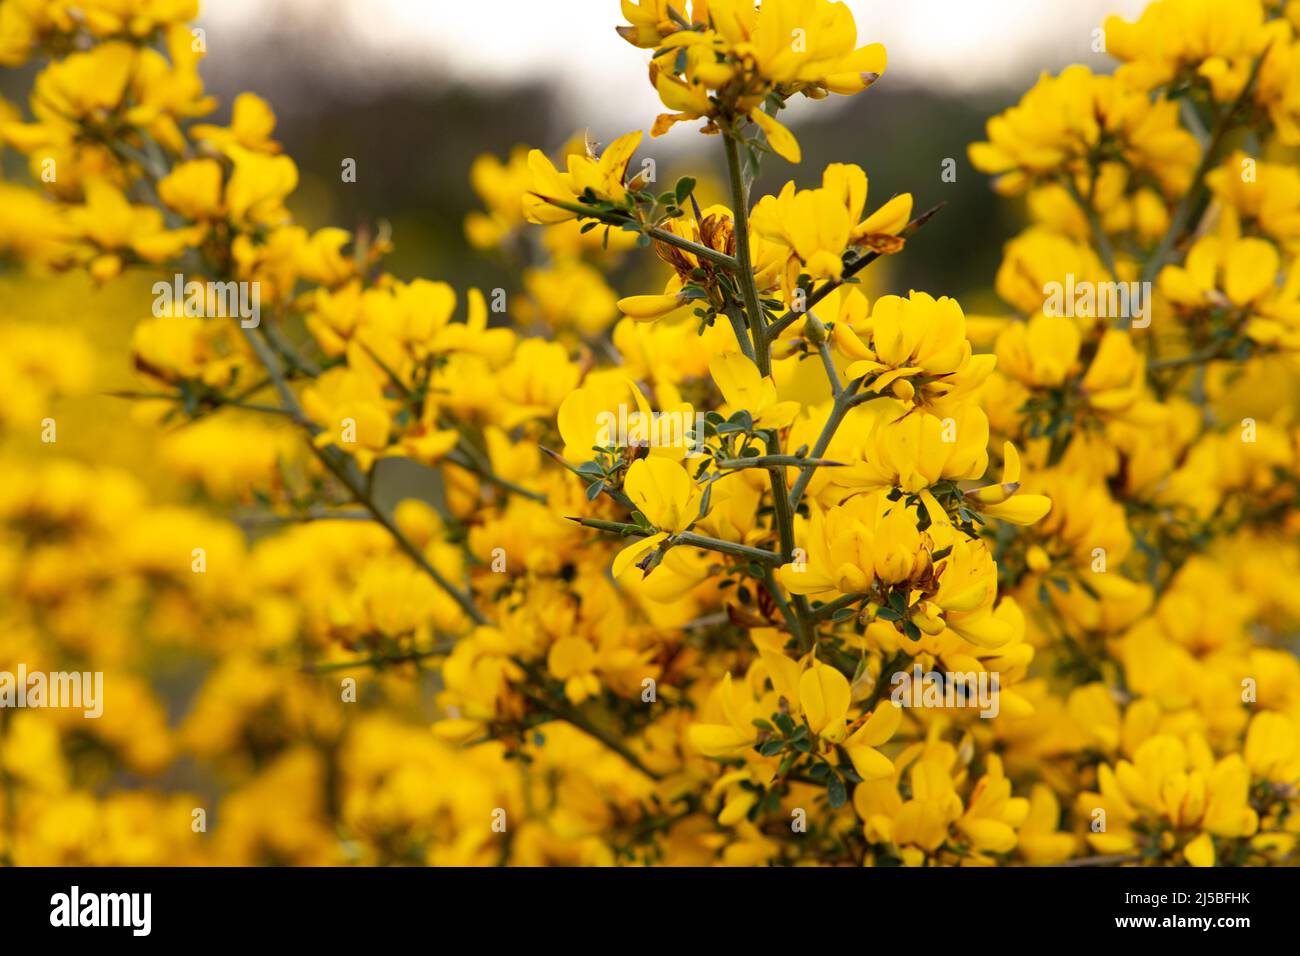 Genista hirsuta is a shrub of the Legume family. Genus of flowering plants in the legume family Stock Photo